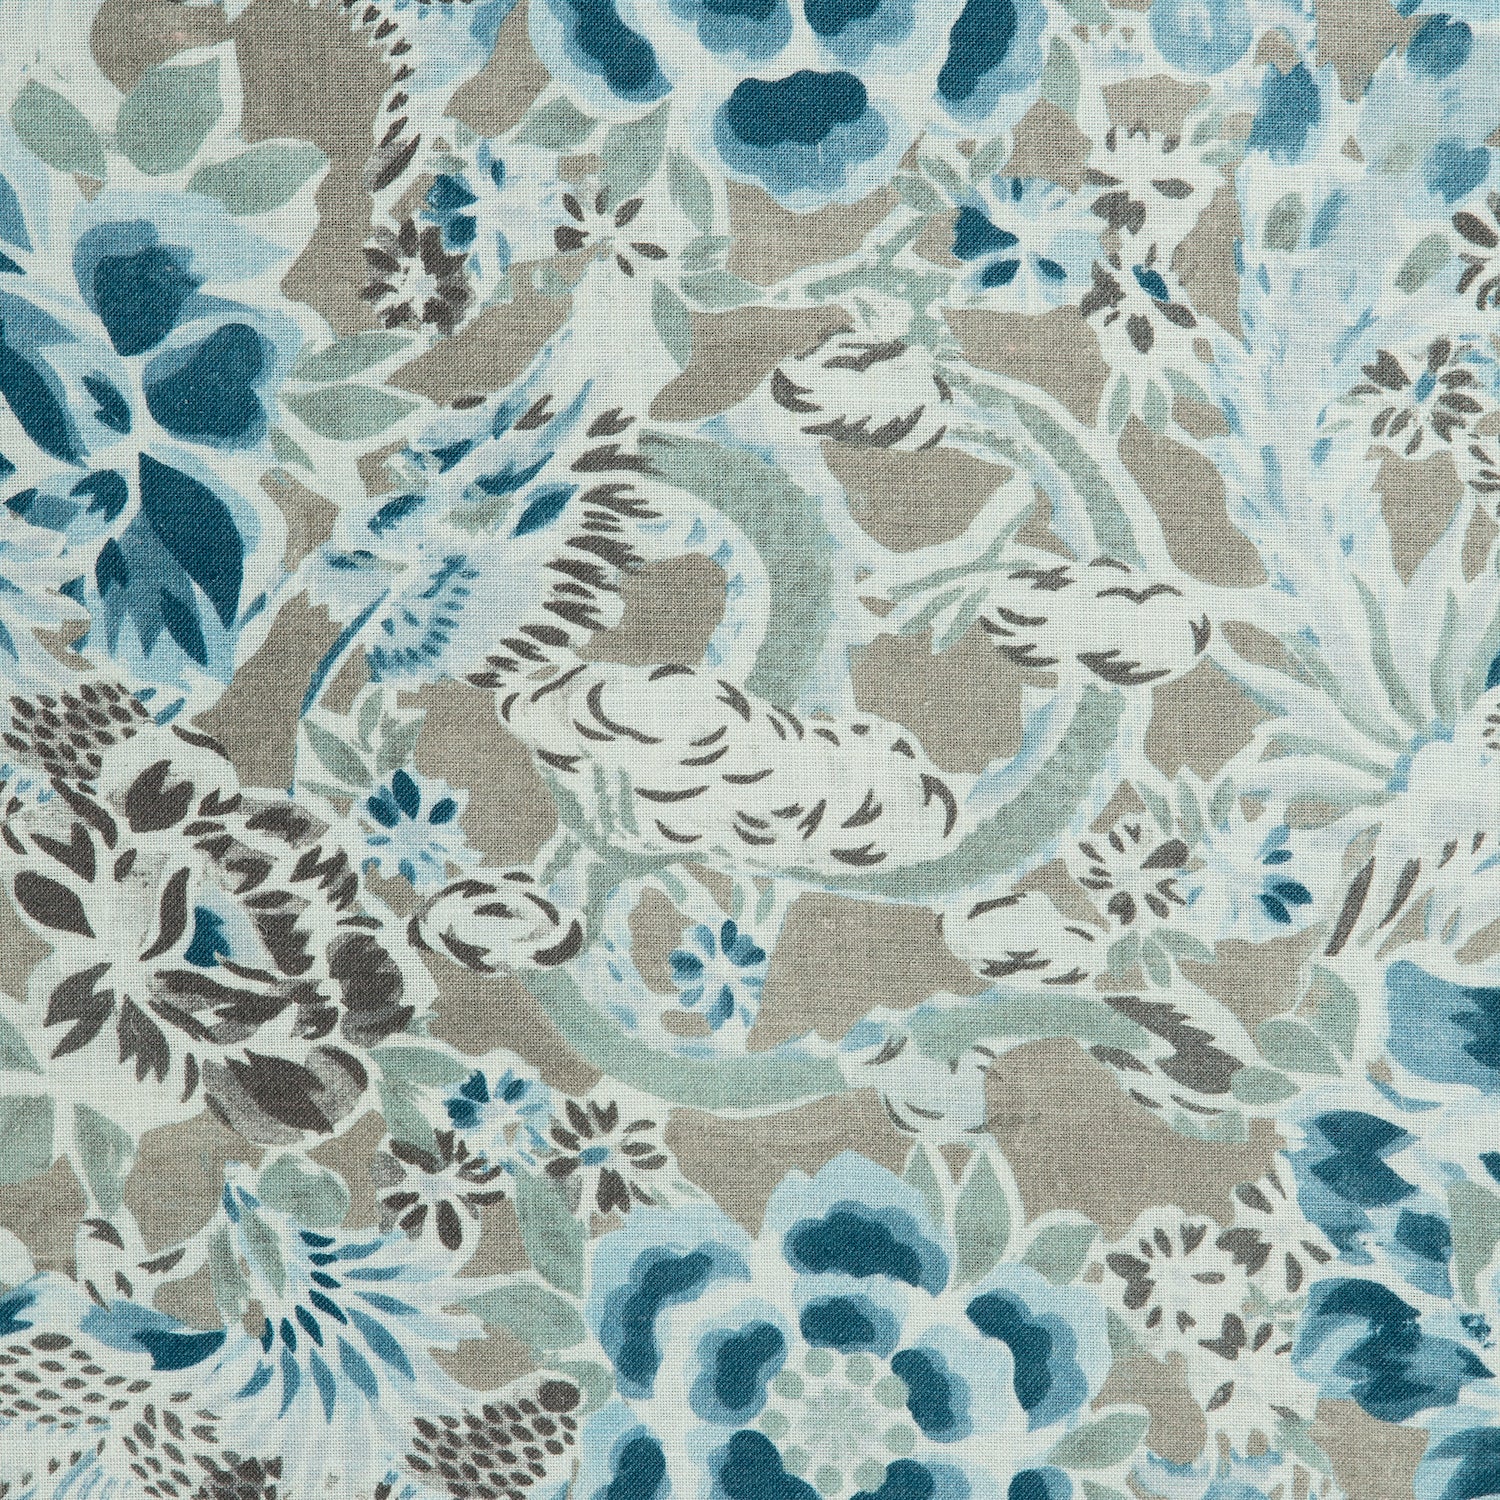 Detail of a linen fabric in a painterly floral pattern in shades of blue and brown on a greige field.